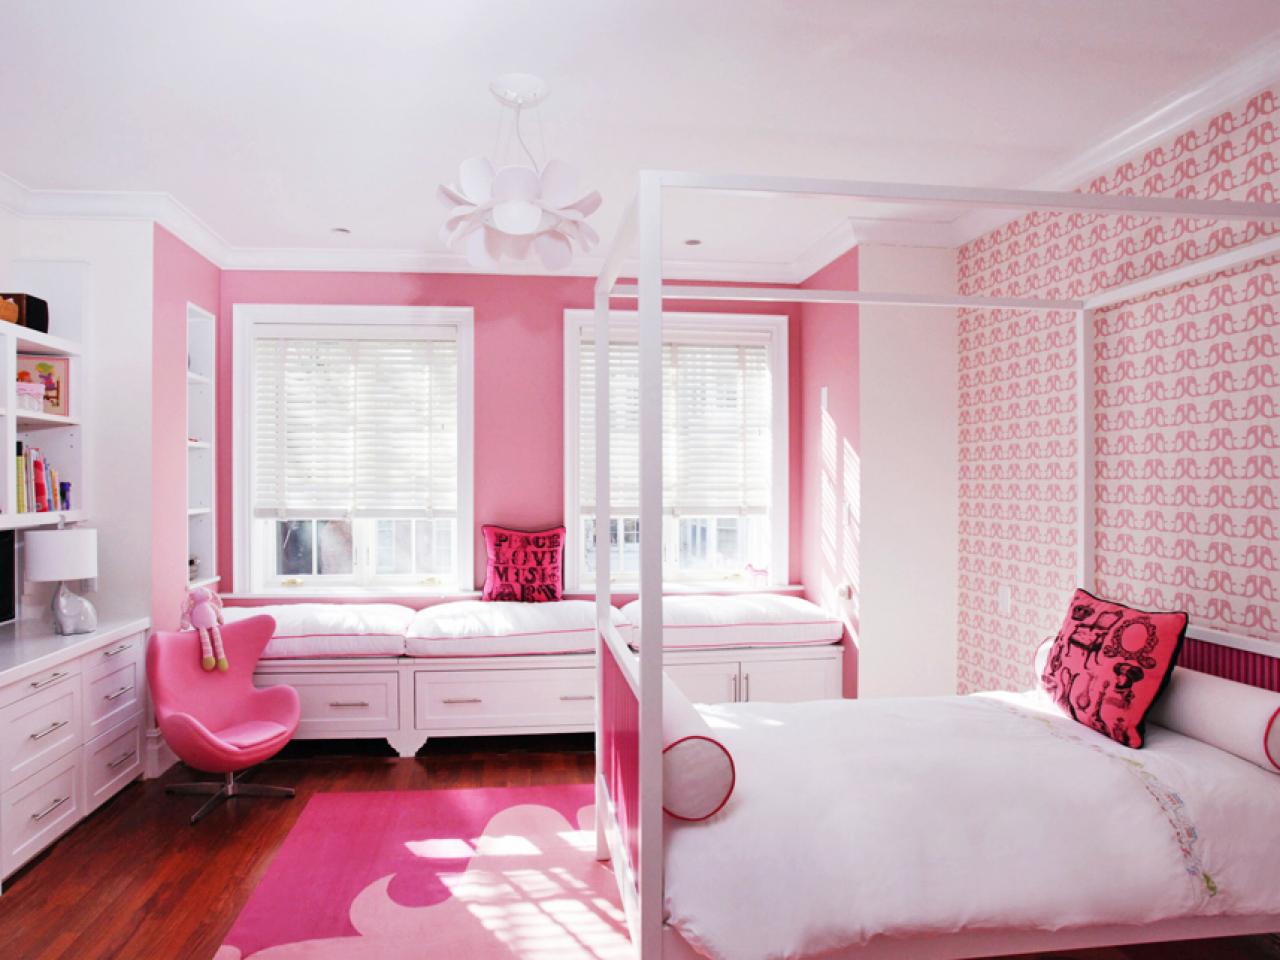 Pink Bedrooms: Pictures, Options & Ideas | HGTV